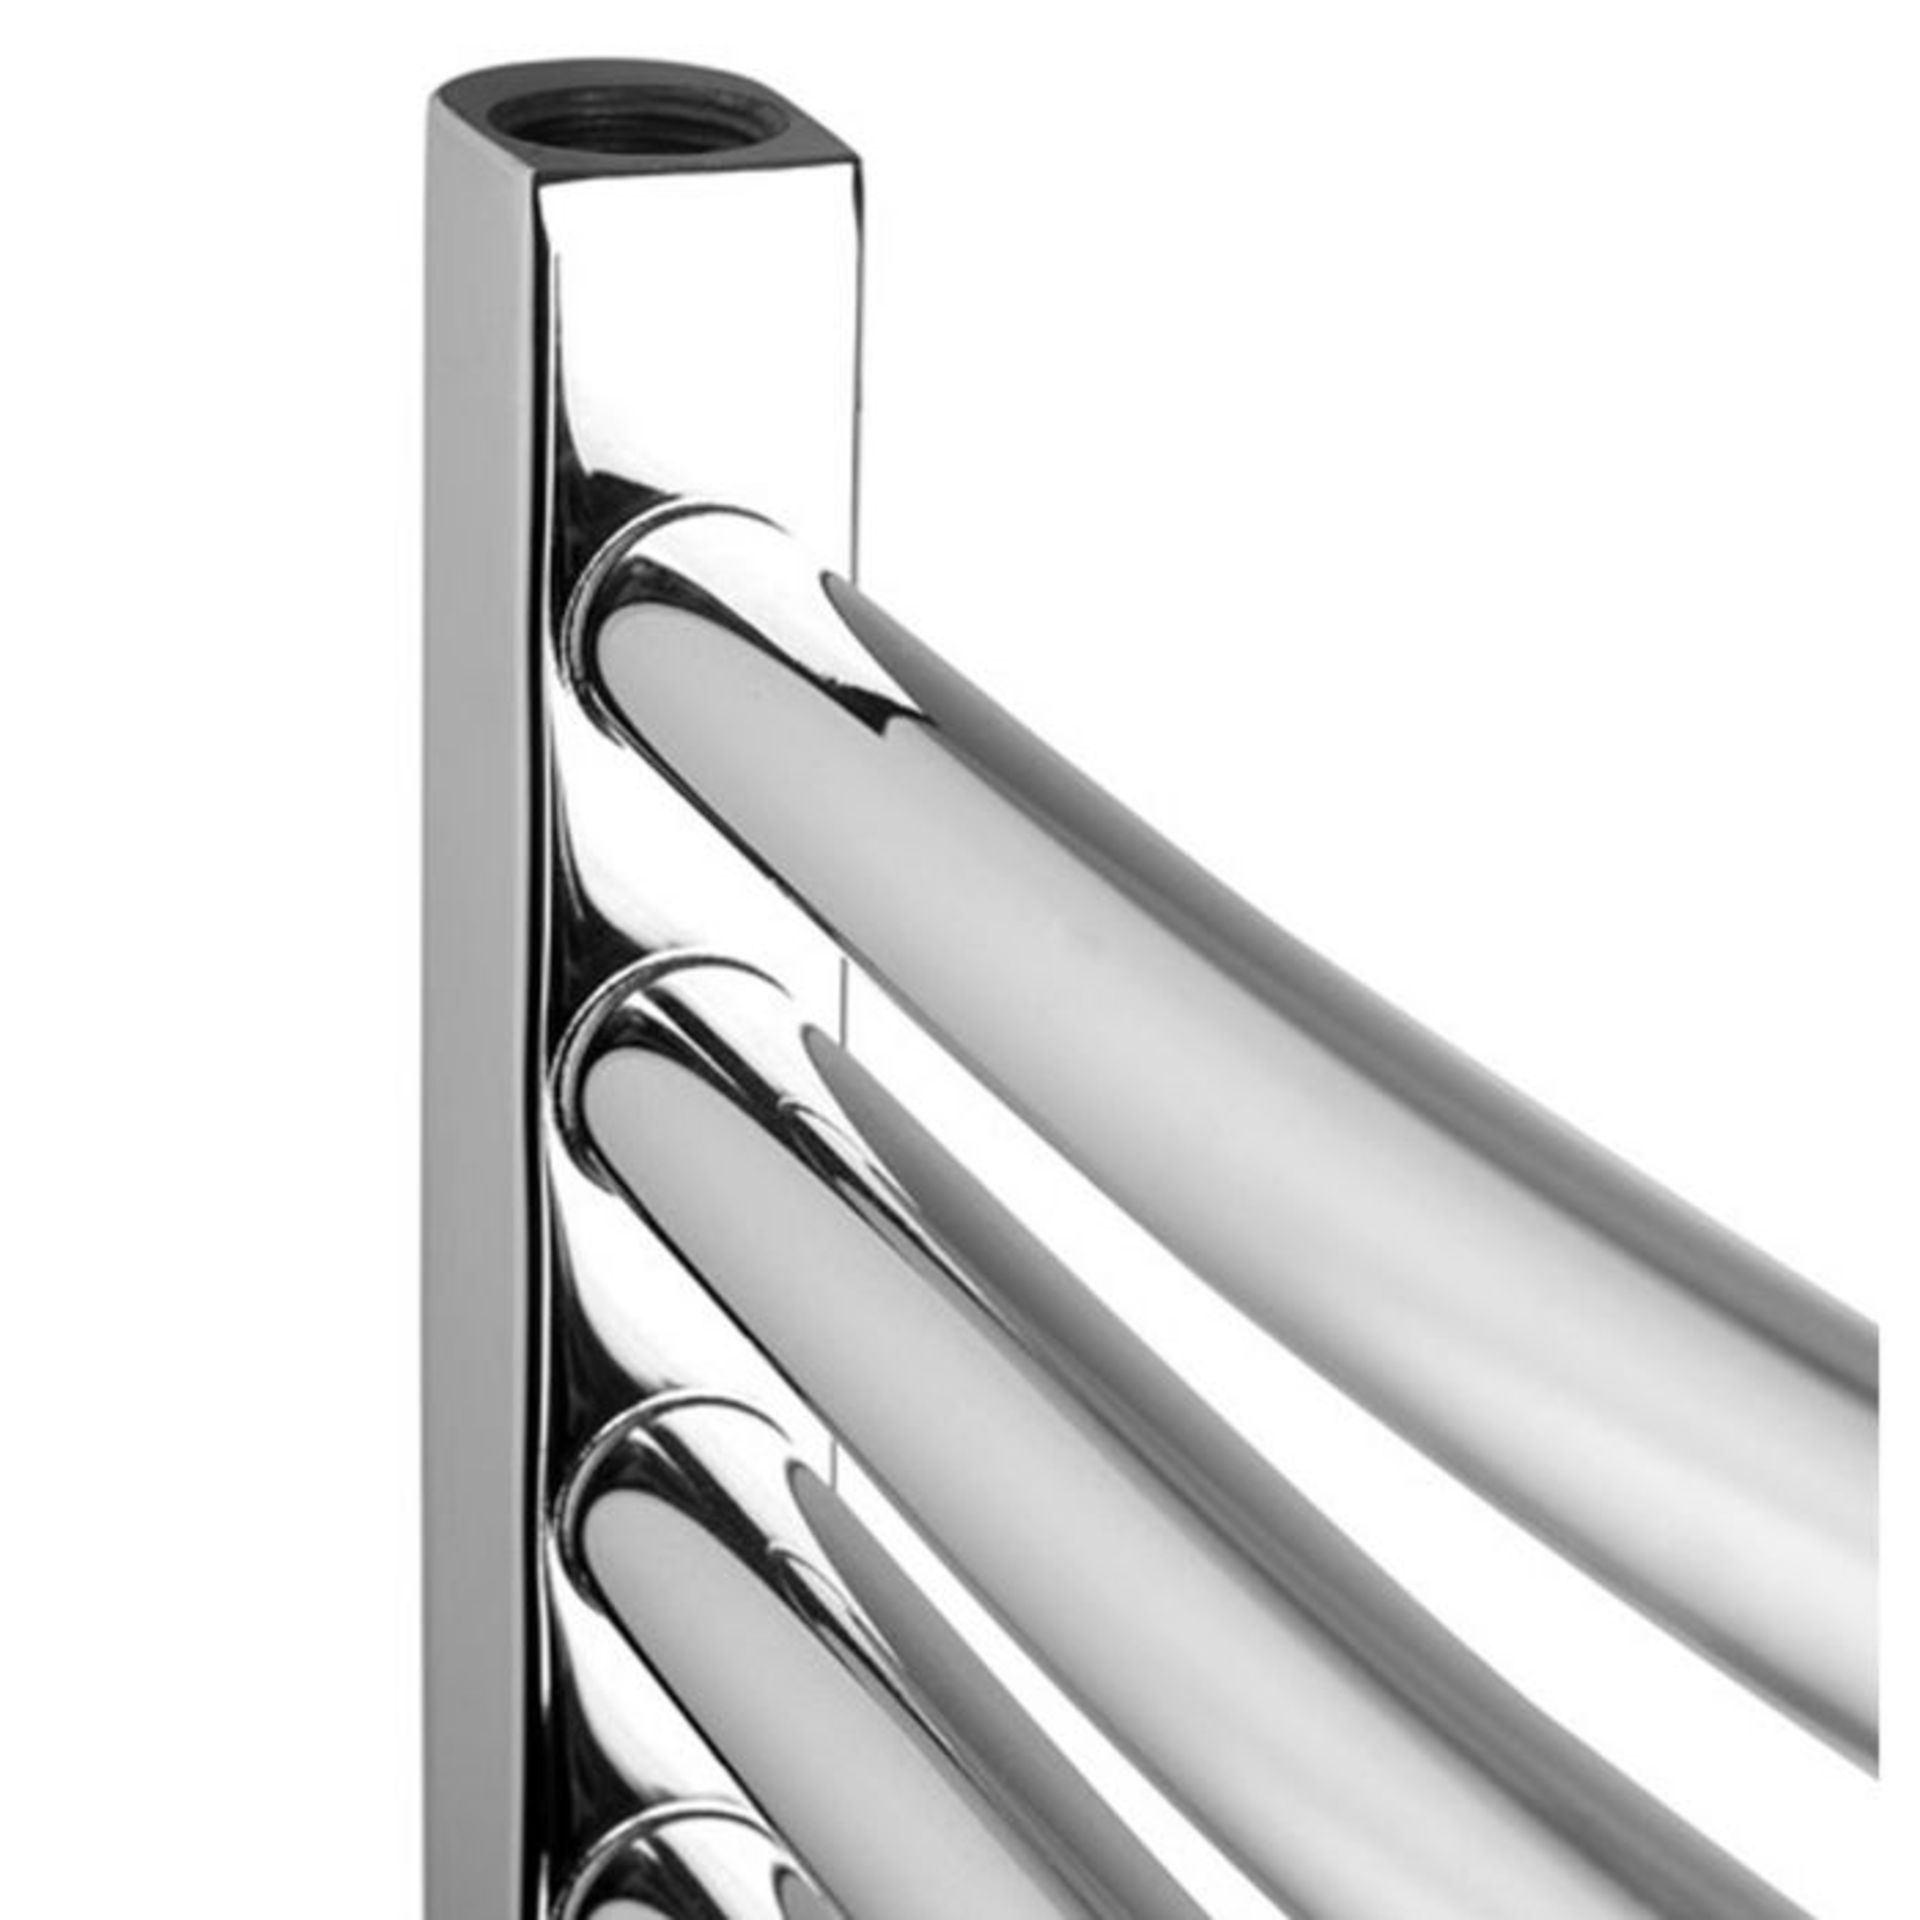 (Z168) 1000x500mm - 20mm Tubes - Chrome Curved Rail Ladder Towel Radiator. Low carbon steel chrome - Image 4 of 5